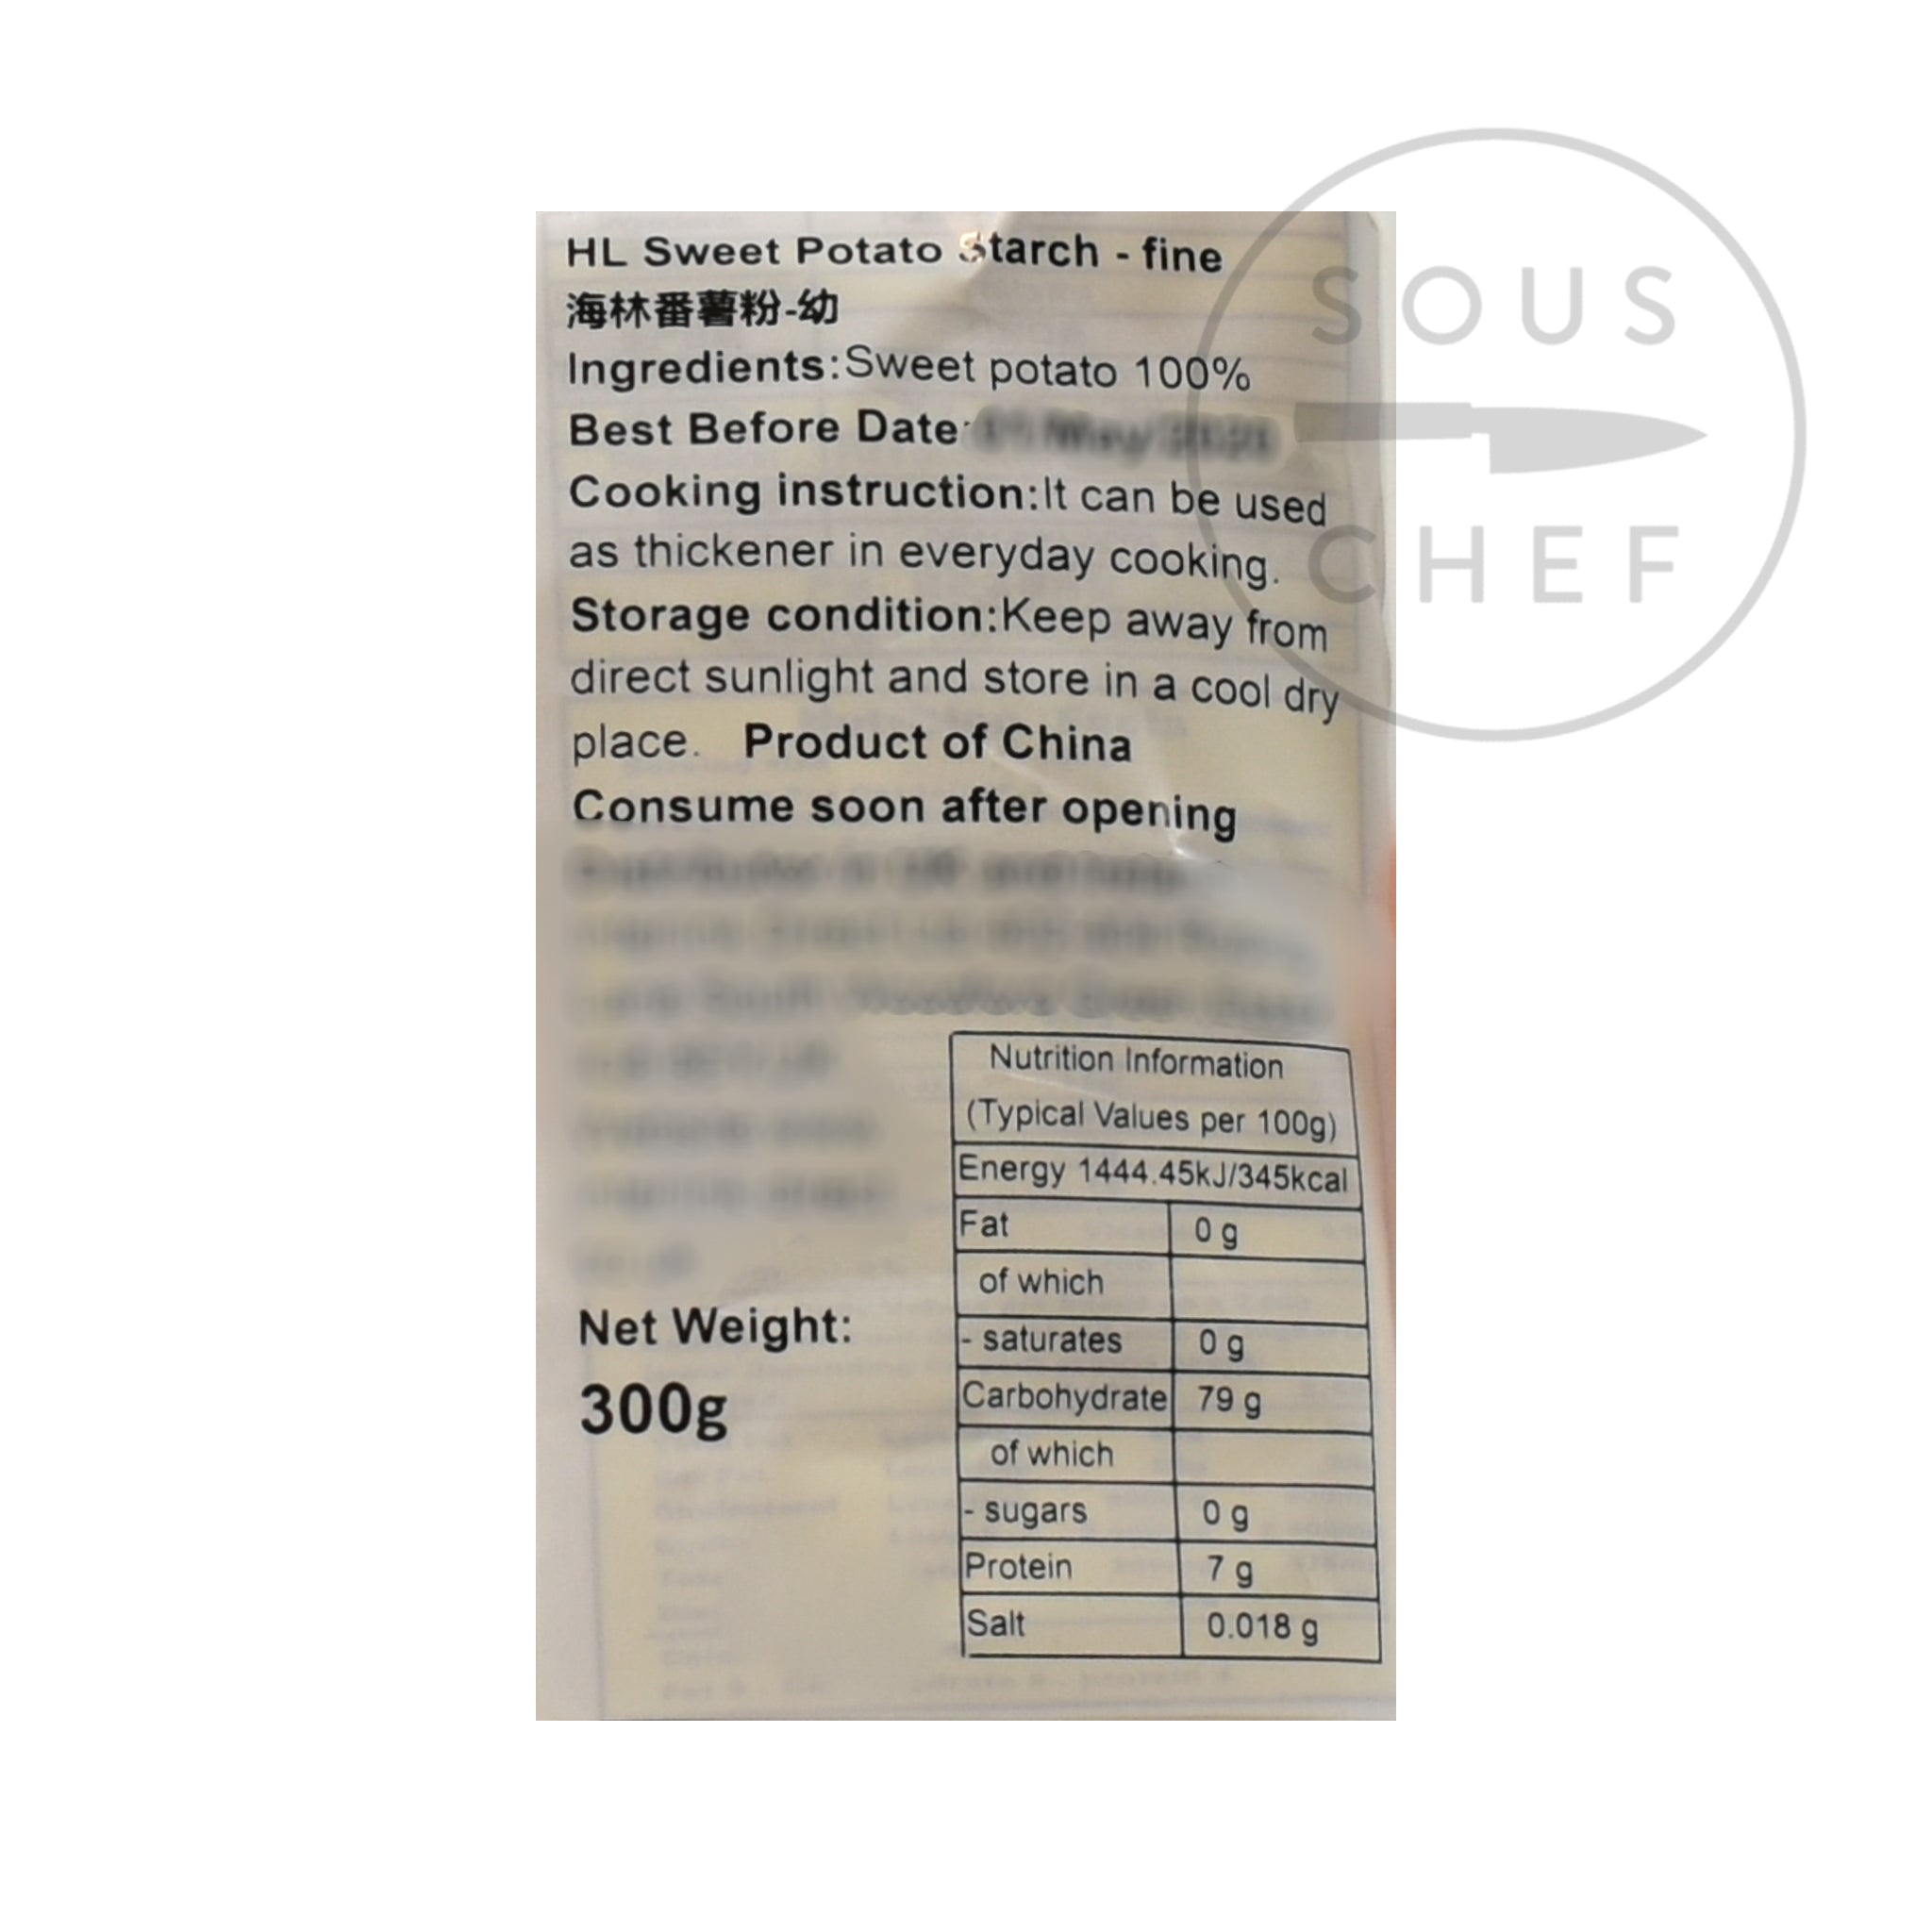 Pure Sweet Potato Starch 300g nutritional information ingredients